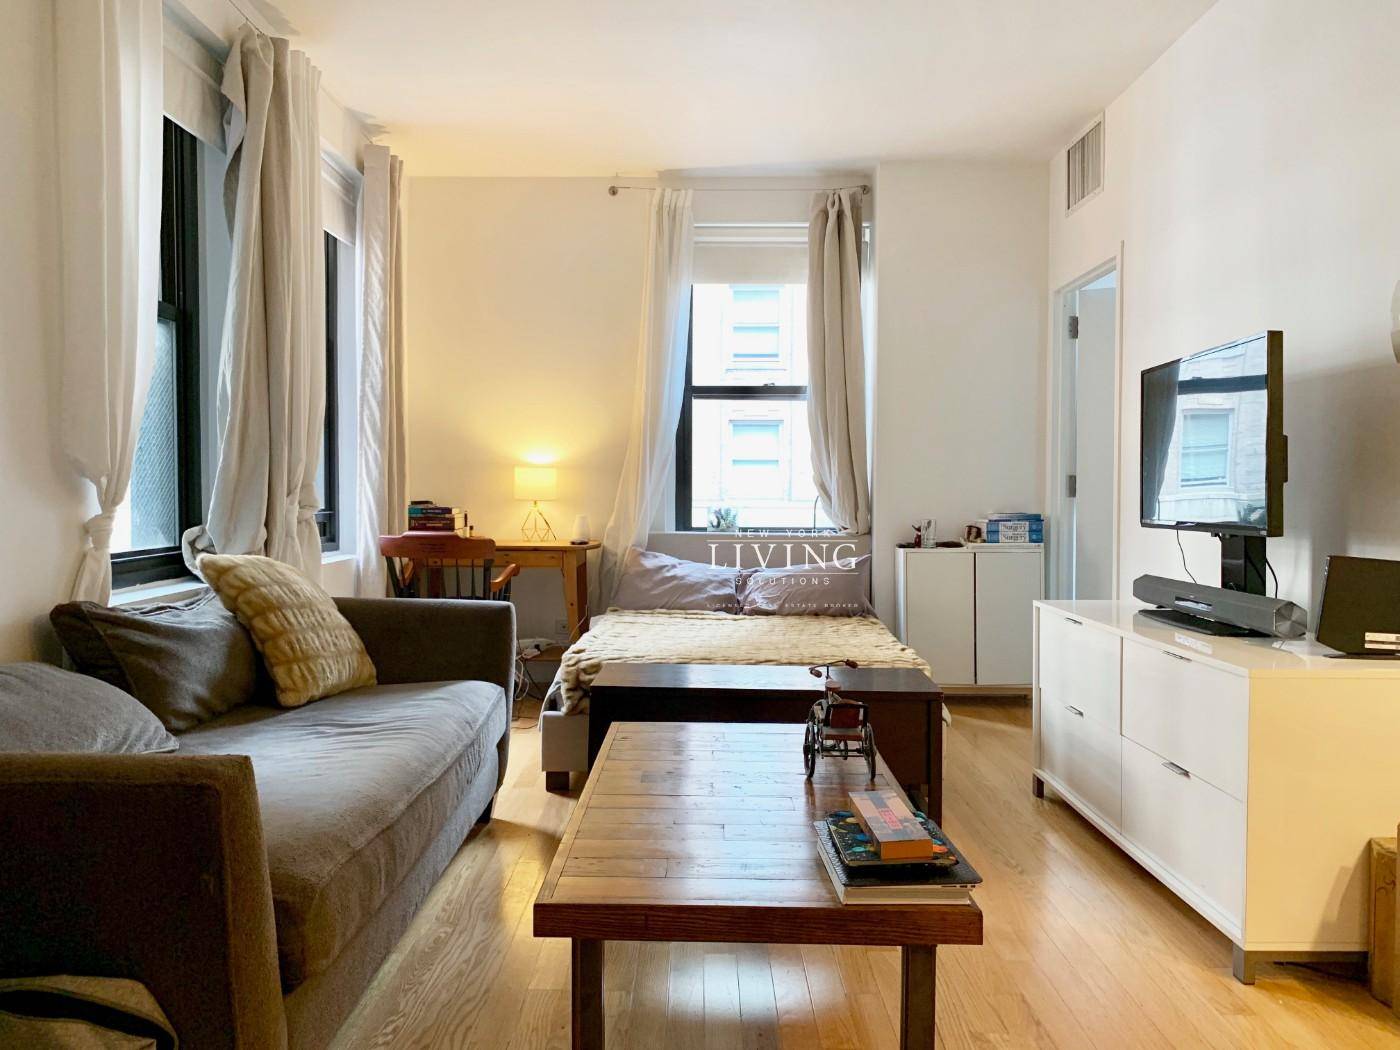 This is an amazing bright studio apartment on a higher floor in a historic landmark building.